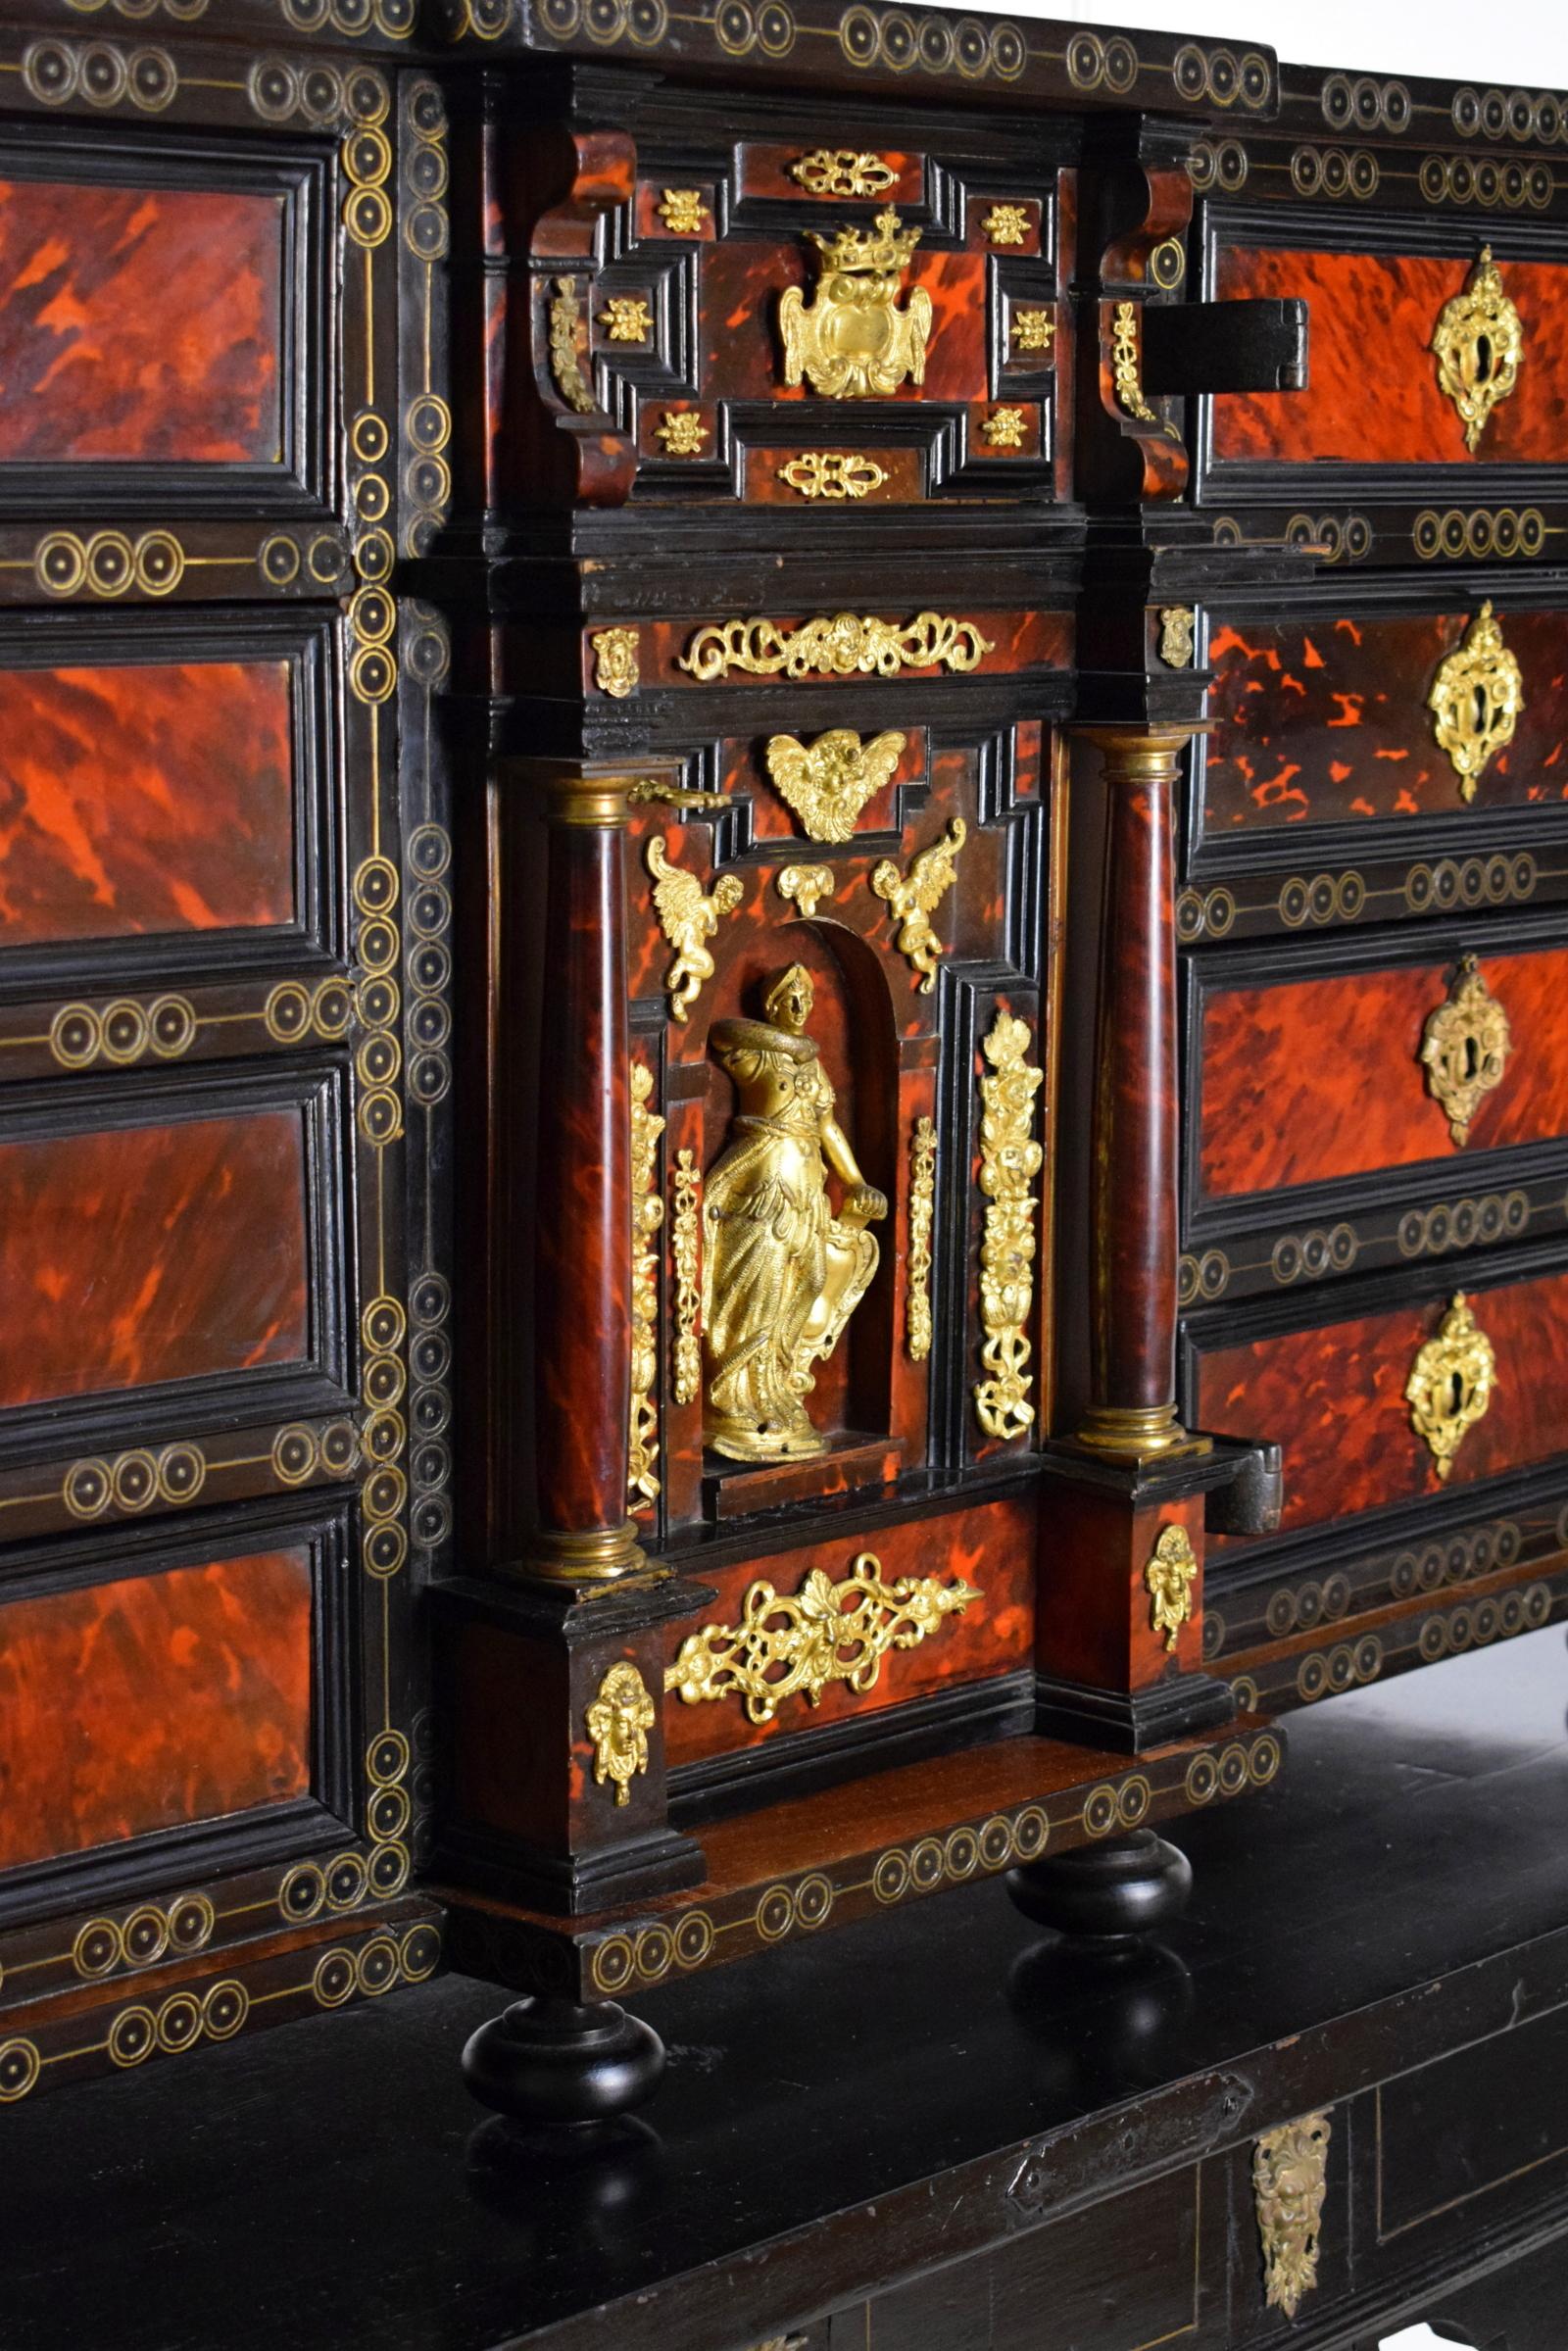 European 18th Century, Louis XIV Wood Apothecary Cabinet with Gilt Bronze